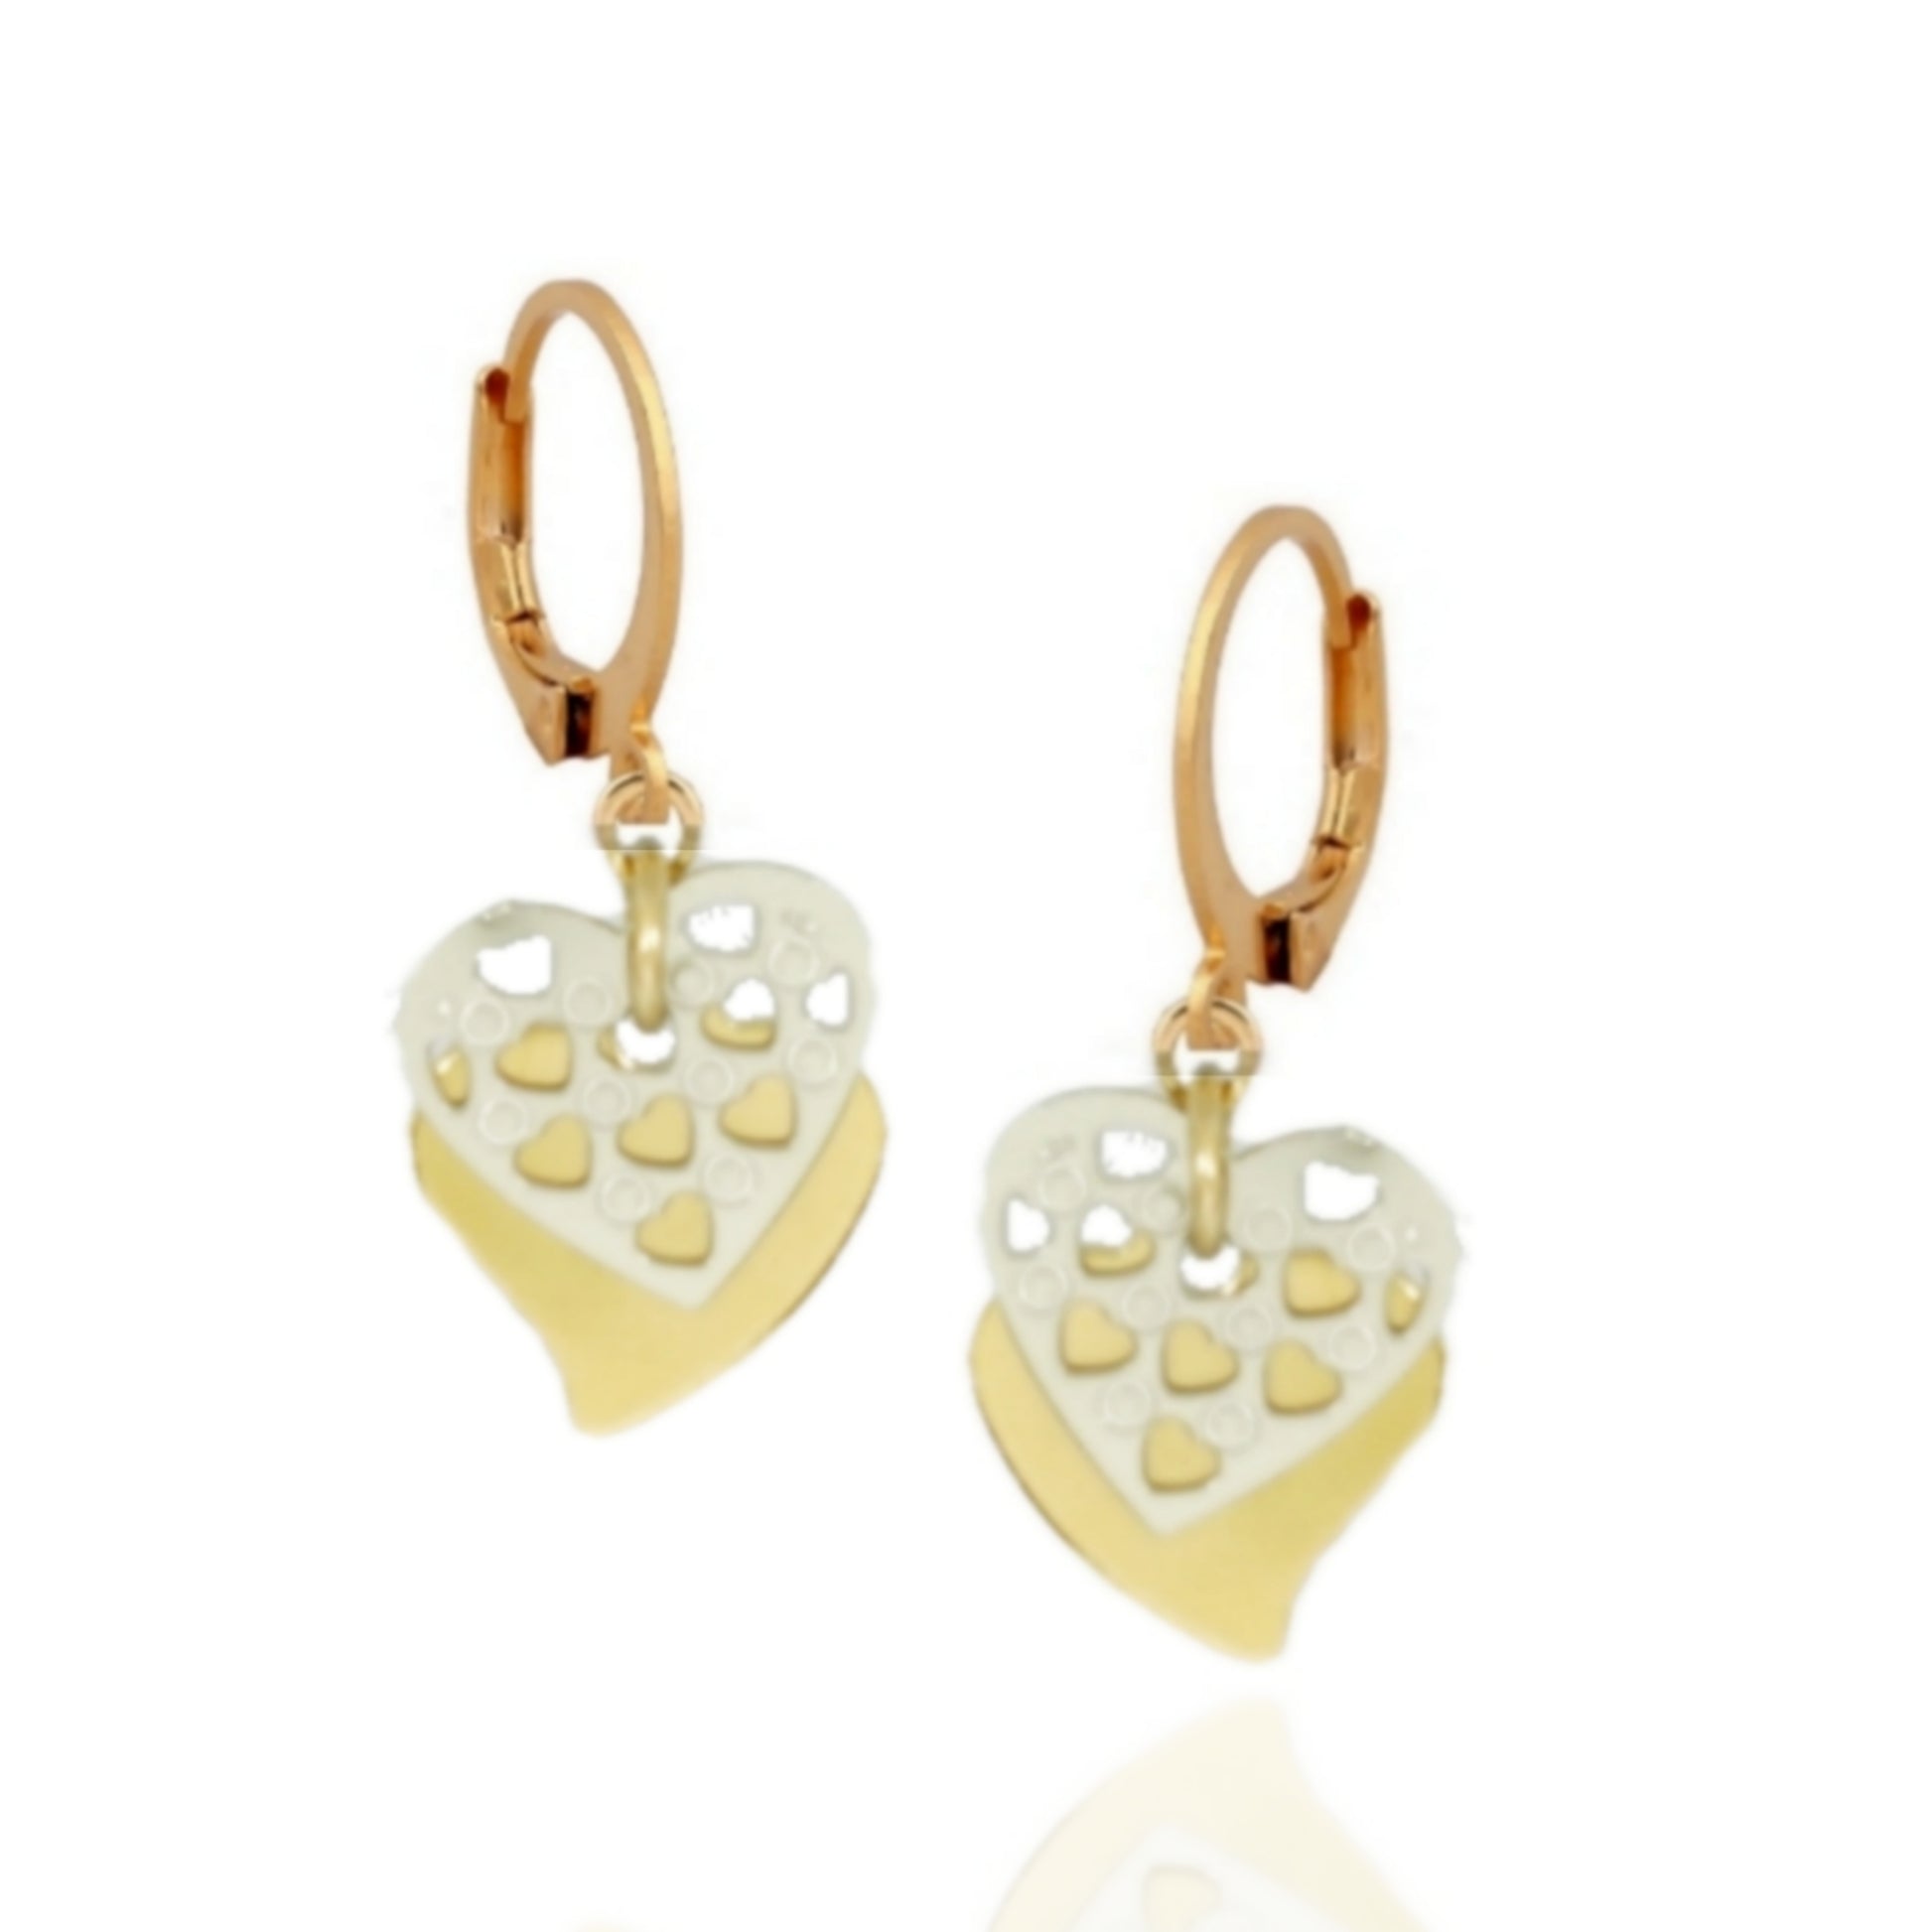 Surgical Steel Heart Hole Punched Earrings - HK Jewels